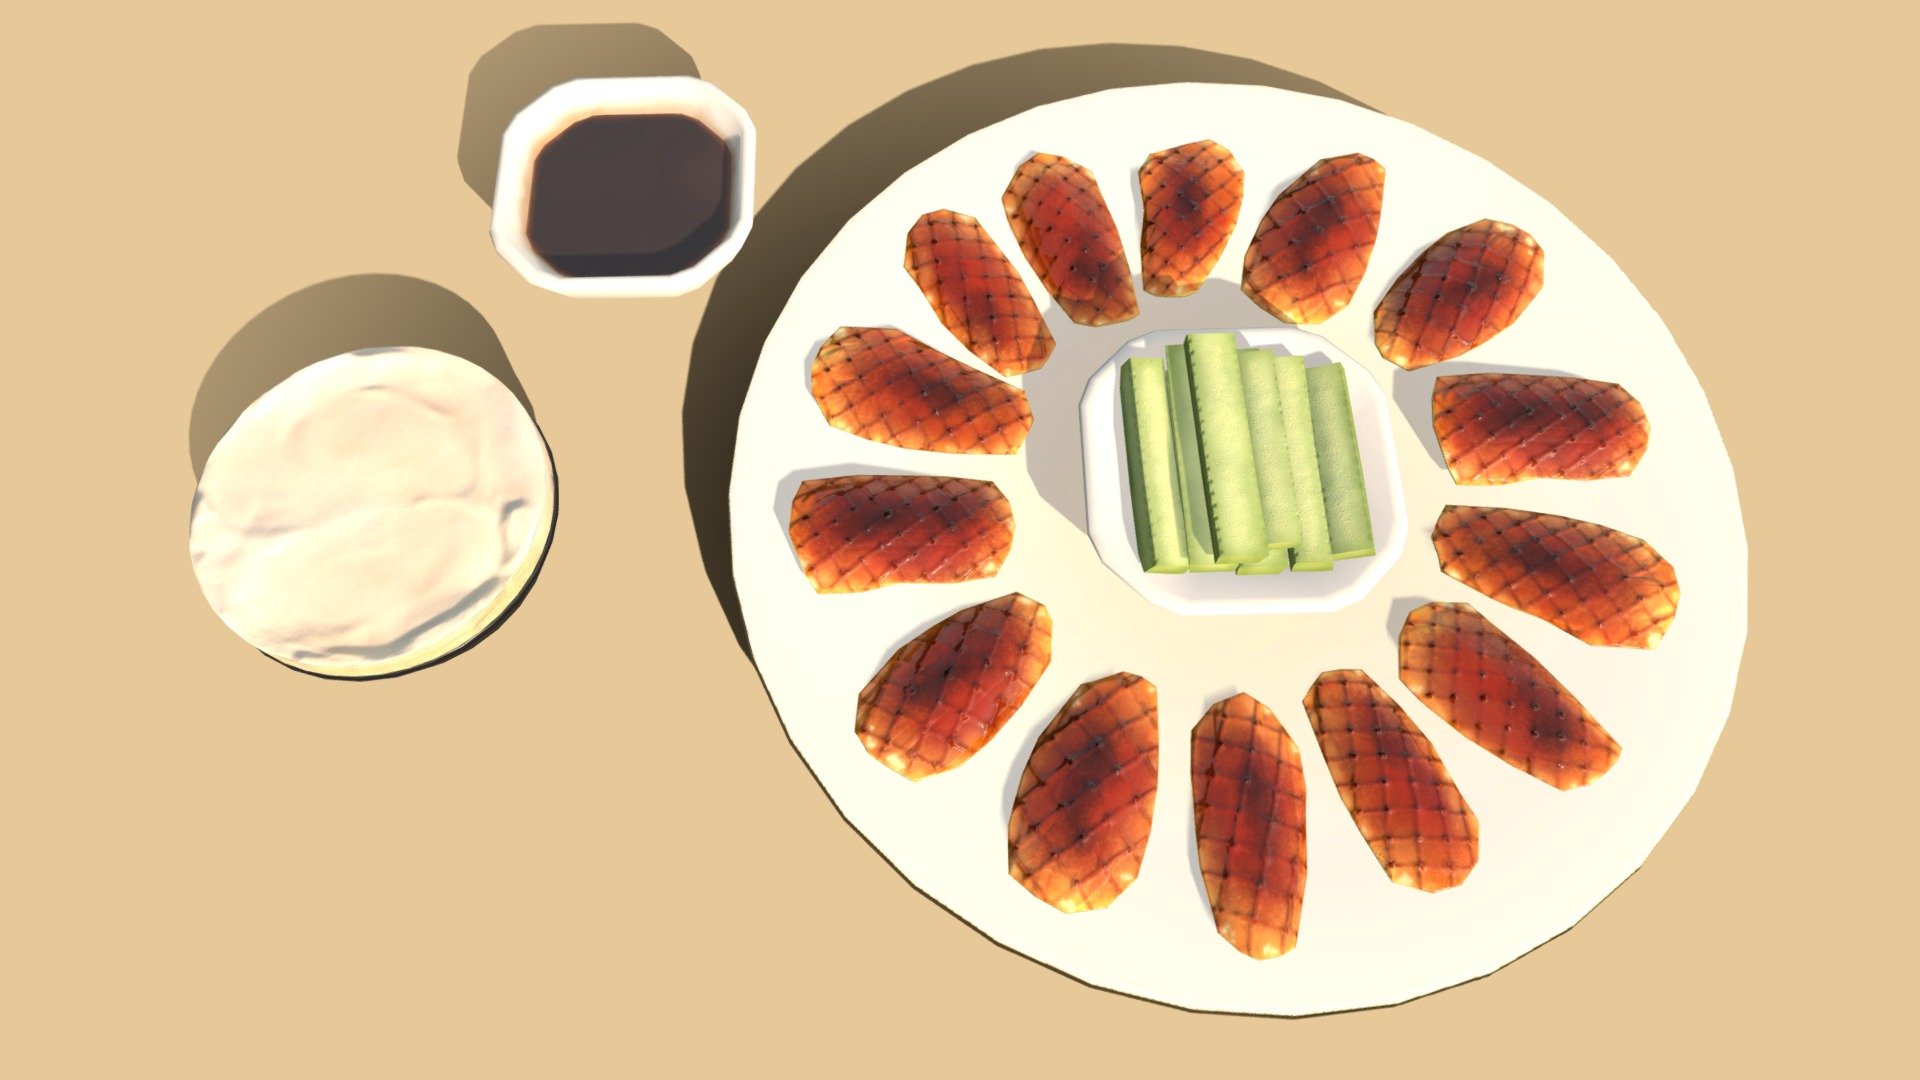 Hi~ It is a Asia food_Peking duck

It has 1732 Polys and 1722 Vertex.
It can be used in game,VR,AR,CG. 

It have 5 textures(PBR)

2048*2048 size

BaseColor1
Ao1
Metallic1
Normal1
Roughness*1

I hope you like it~

Thank you.If you have any question , please tell me 3d model